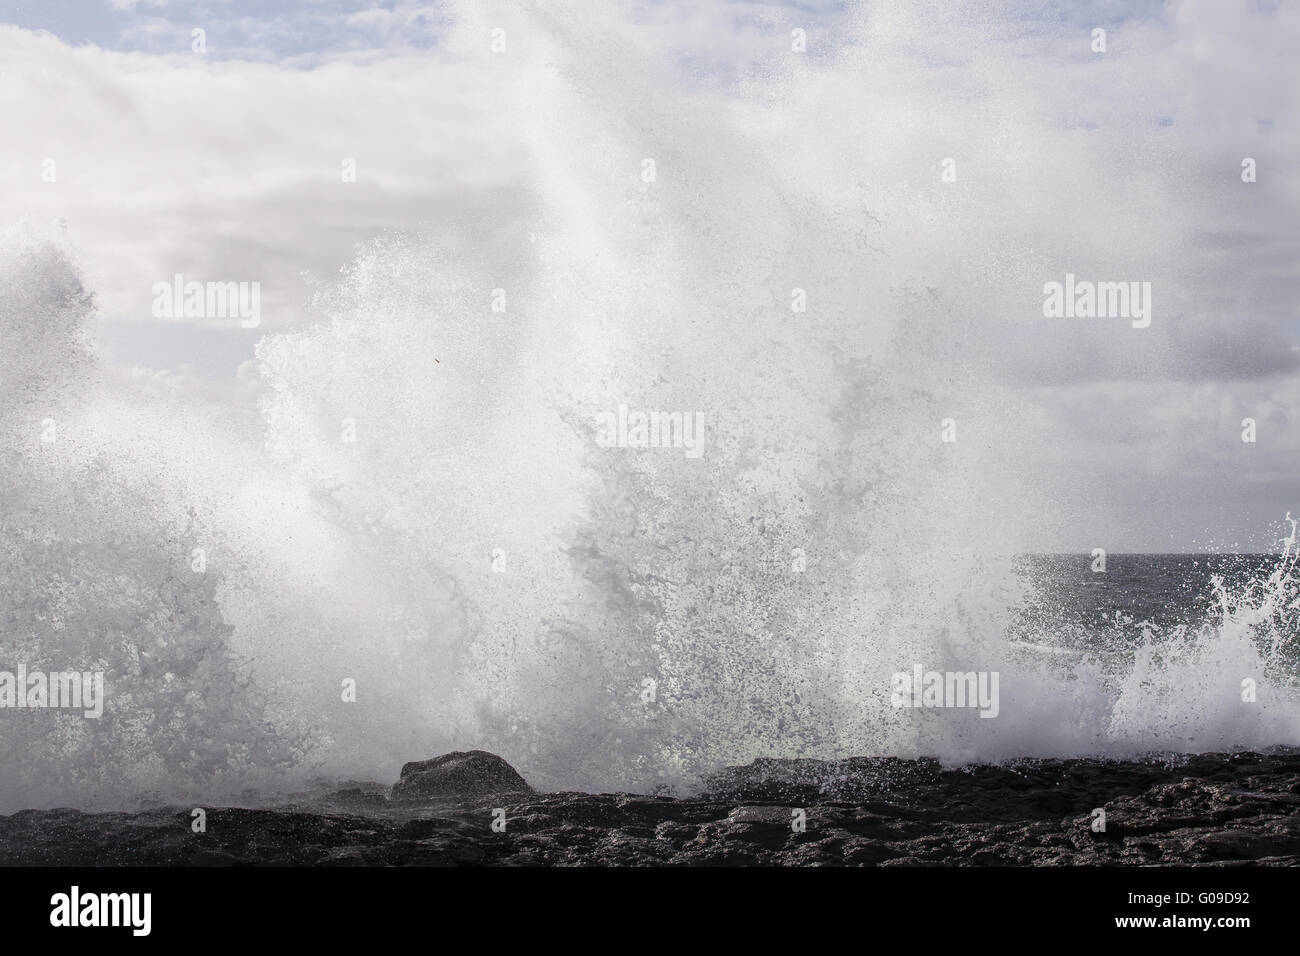 Surf of the North Atlantic Ocean on the coast of I Stock Photo